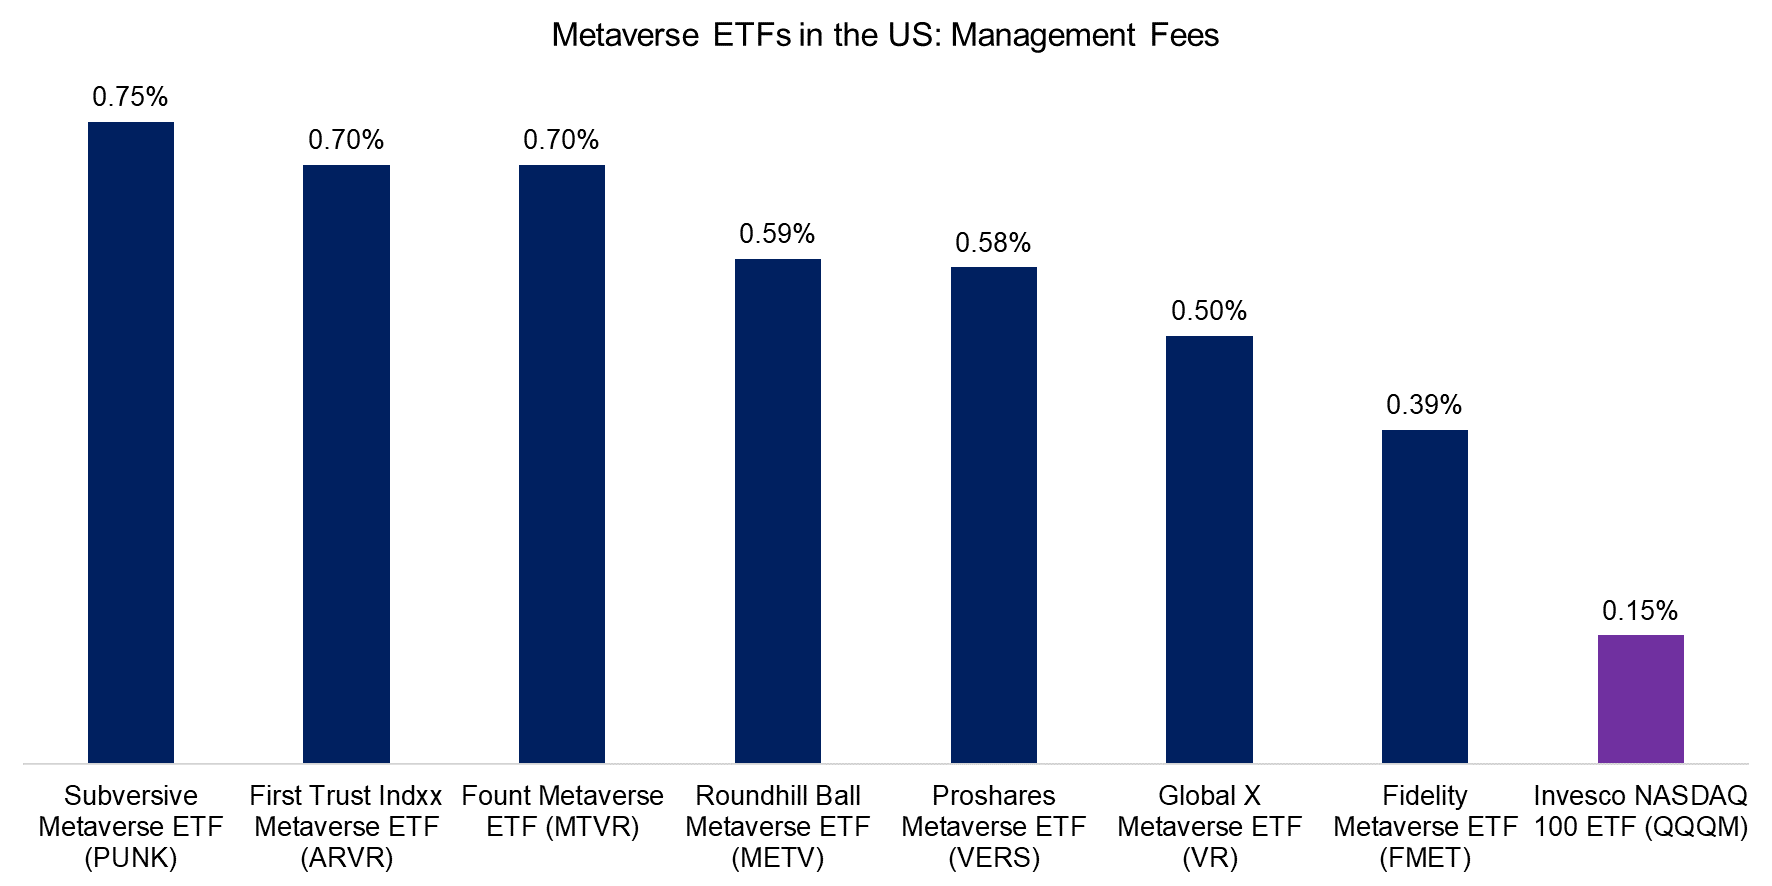 Metaverse ETFs in the US Management Fees